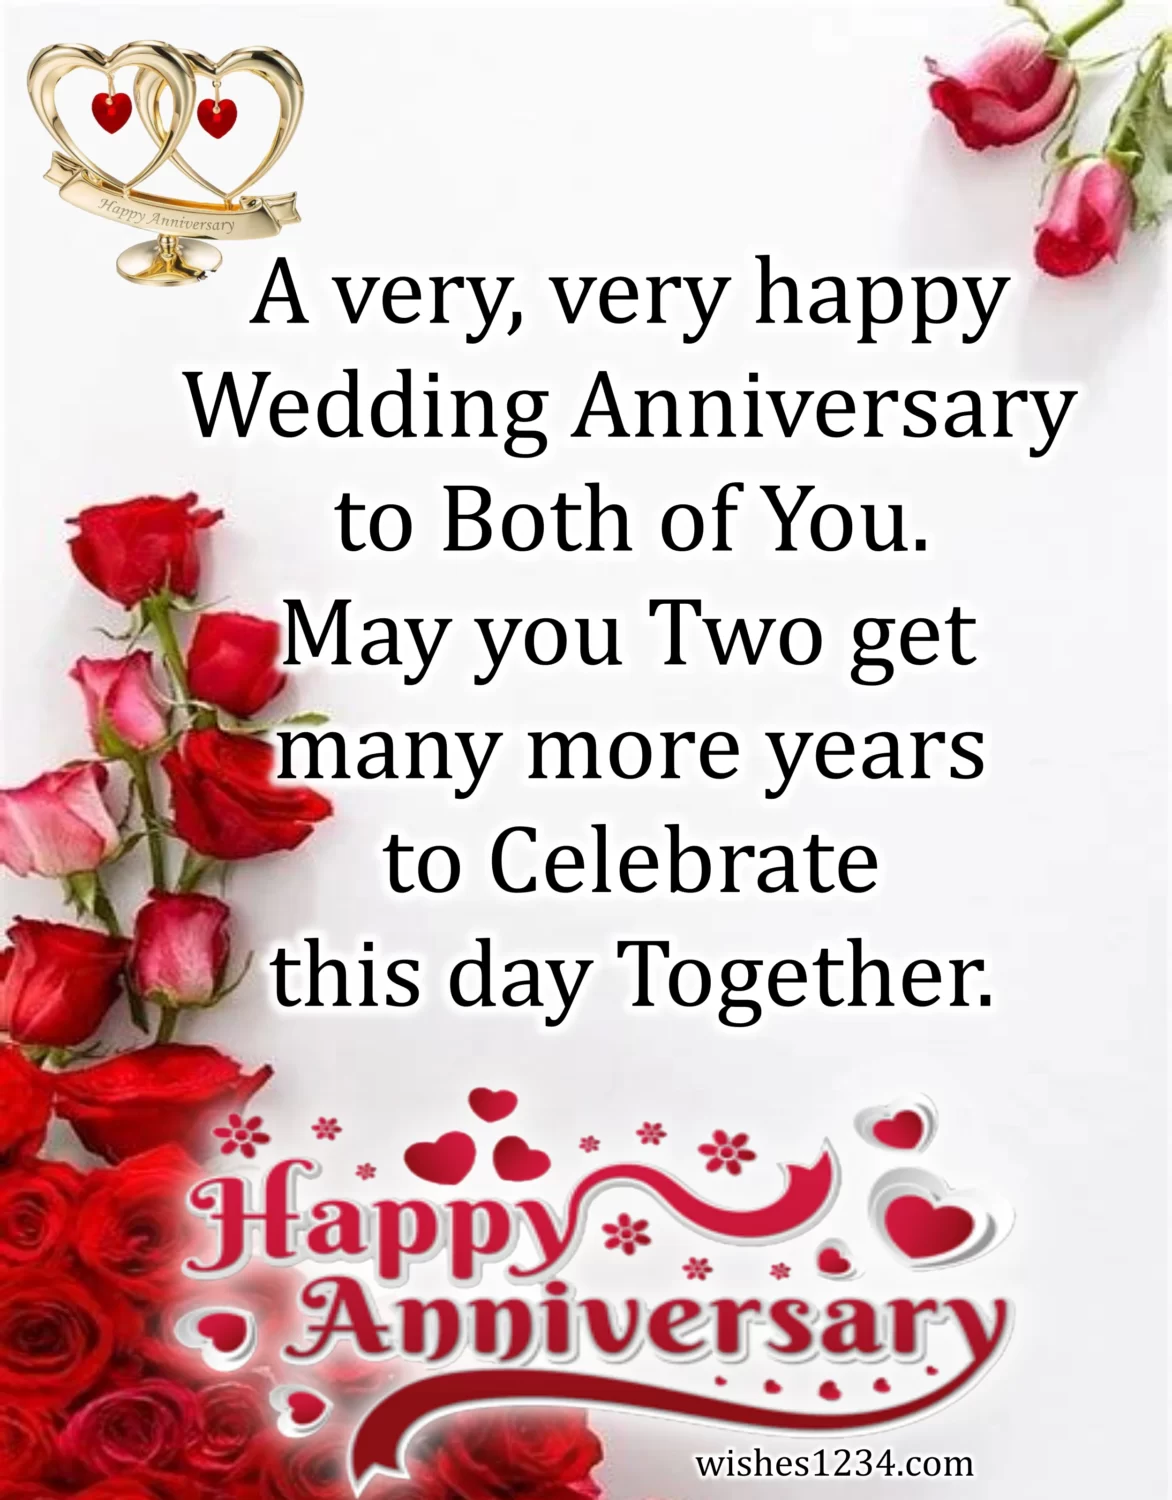 Wedding anniversary wishes with red roses, Happy Anniversary Quotes.